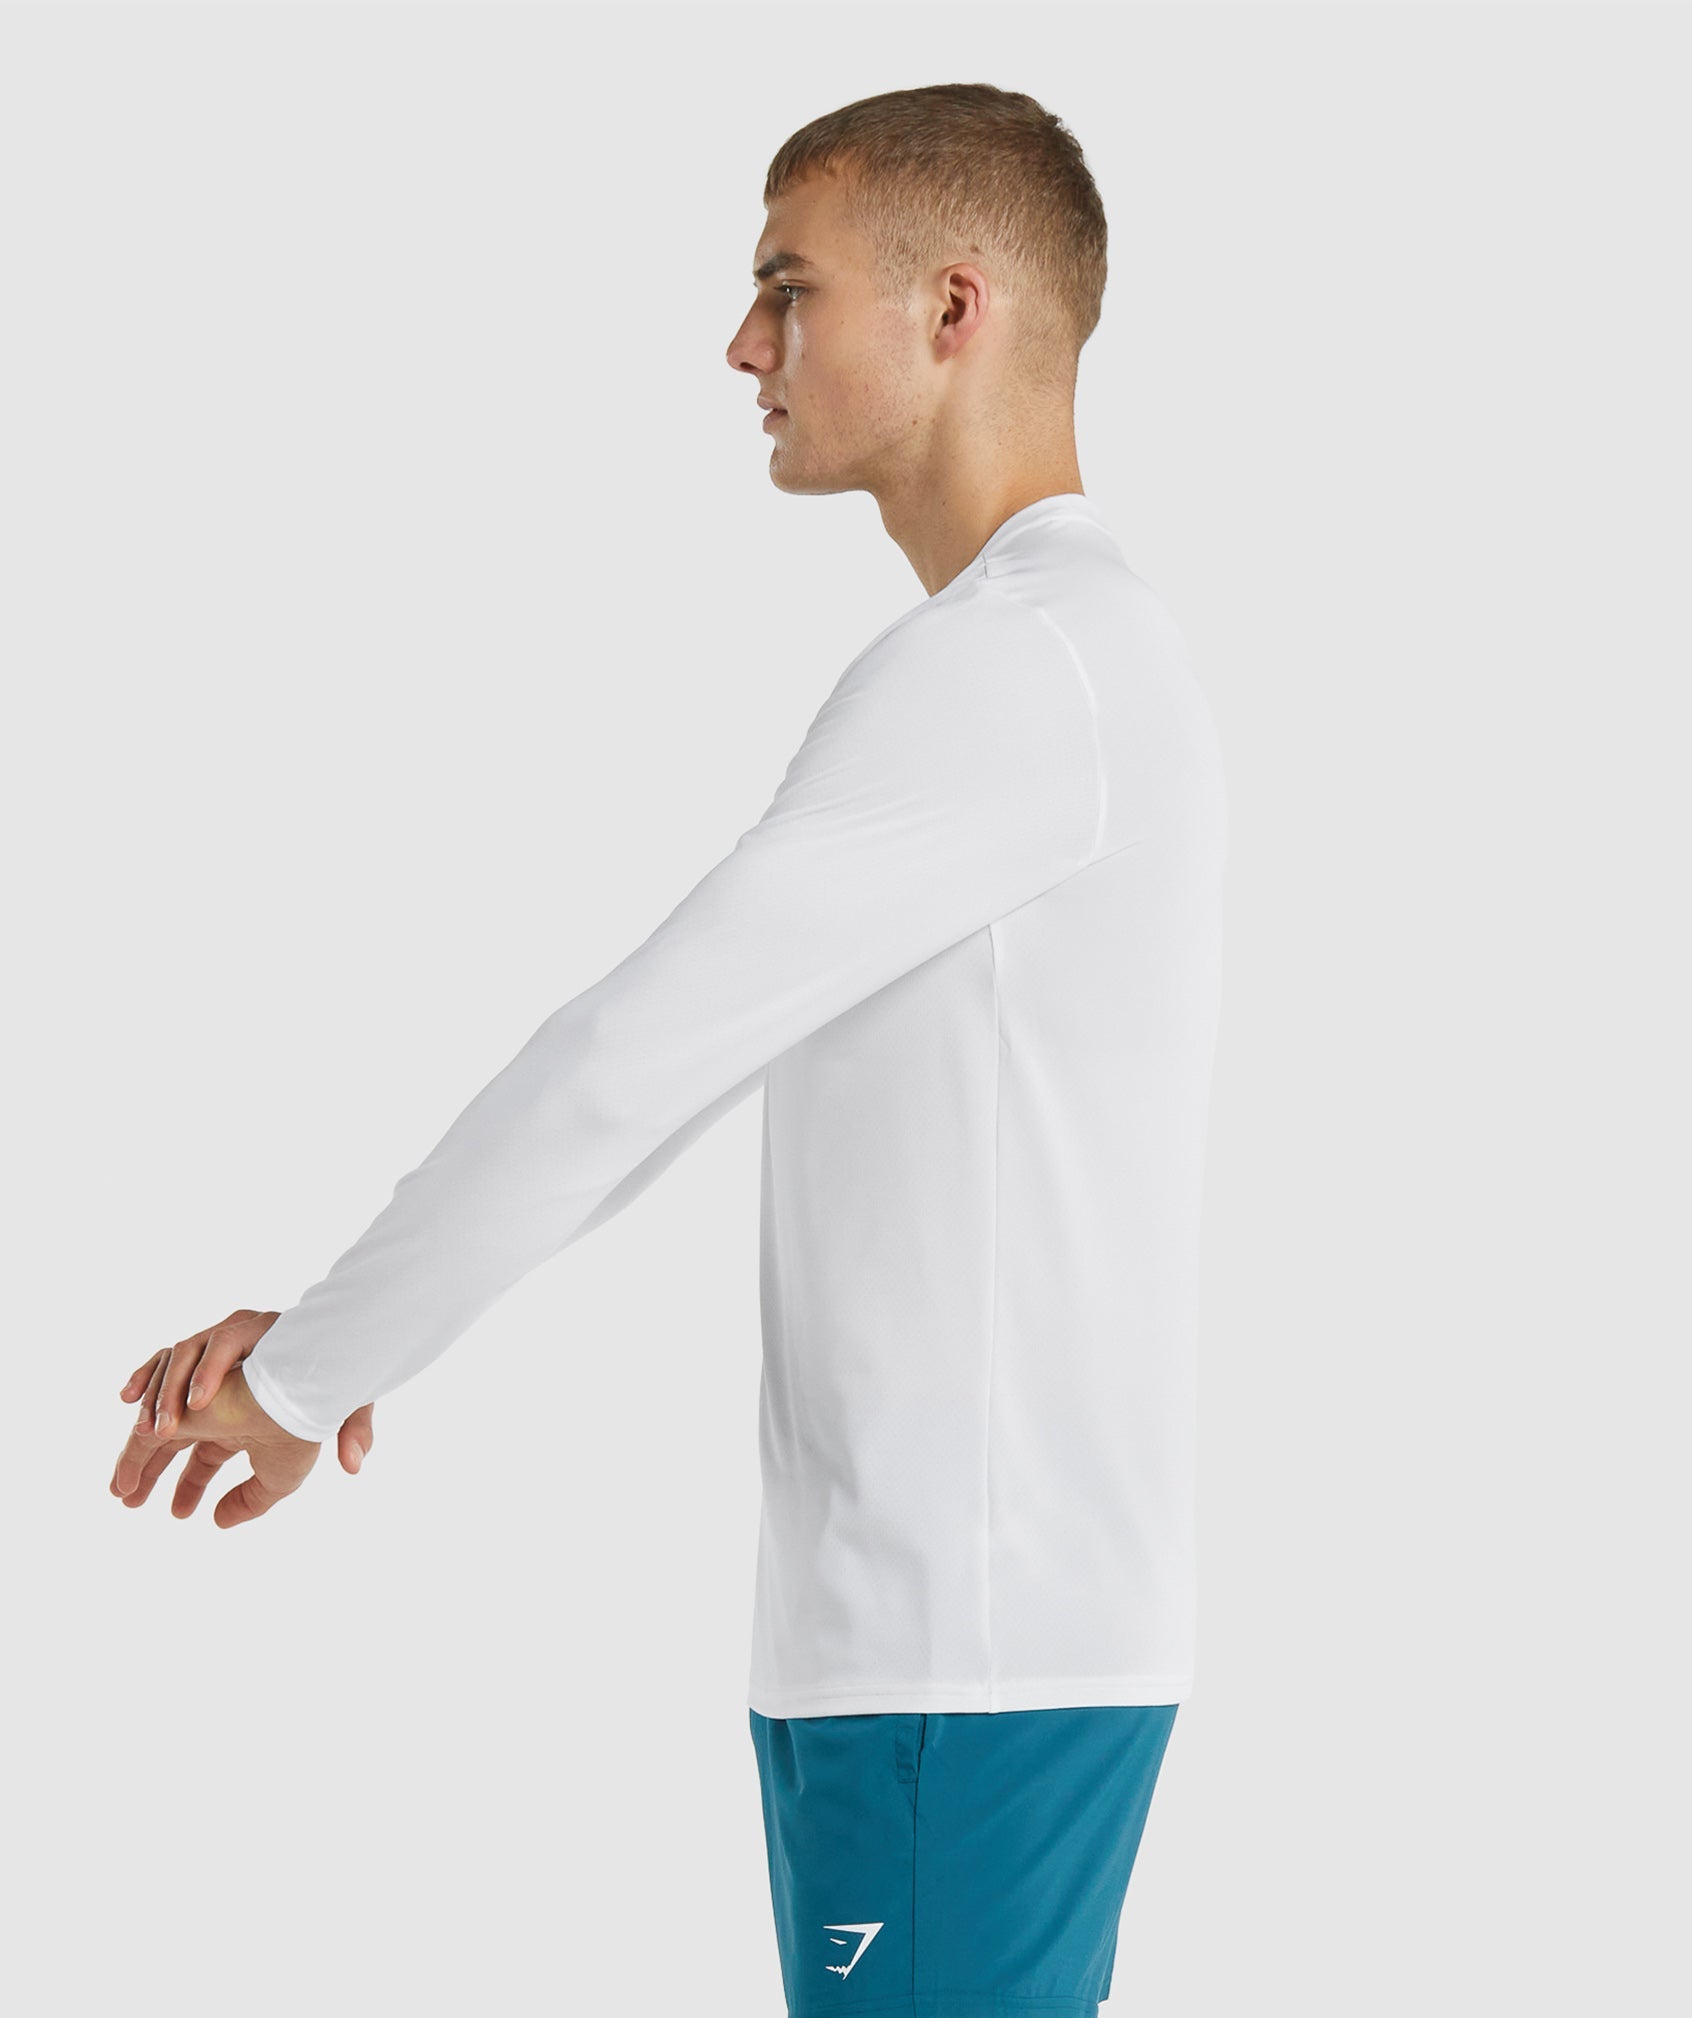 Arrival Long Sleeve T-Shirt in White - view 3